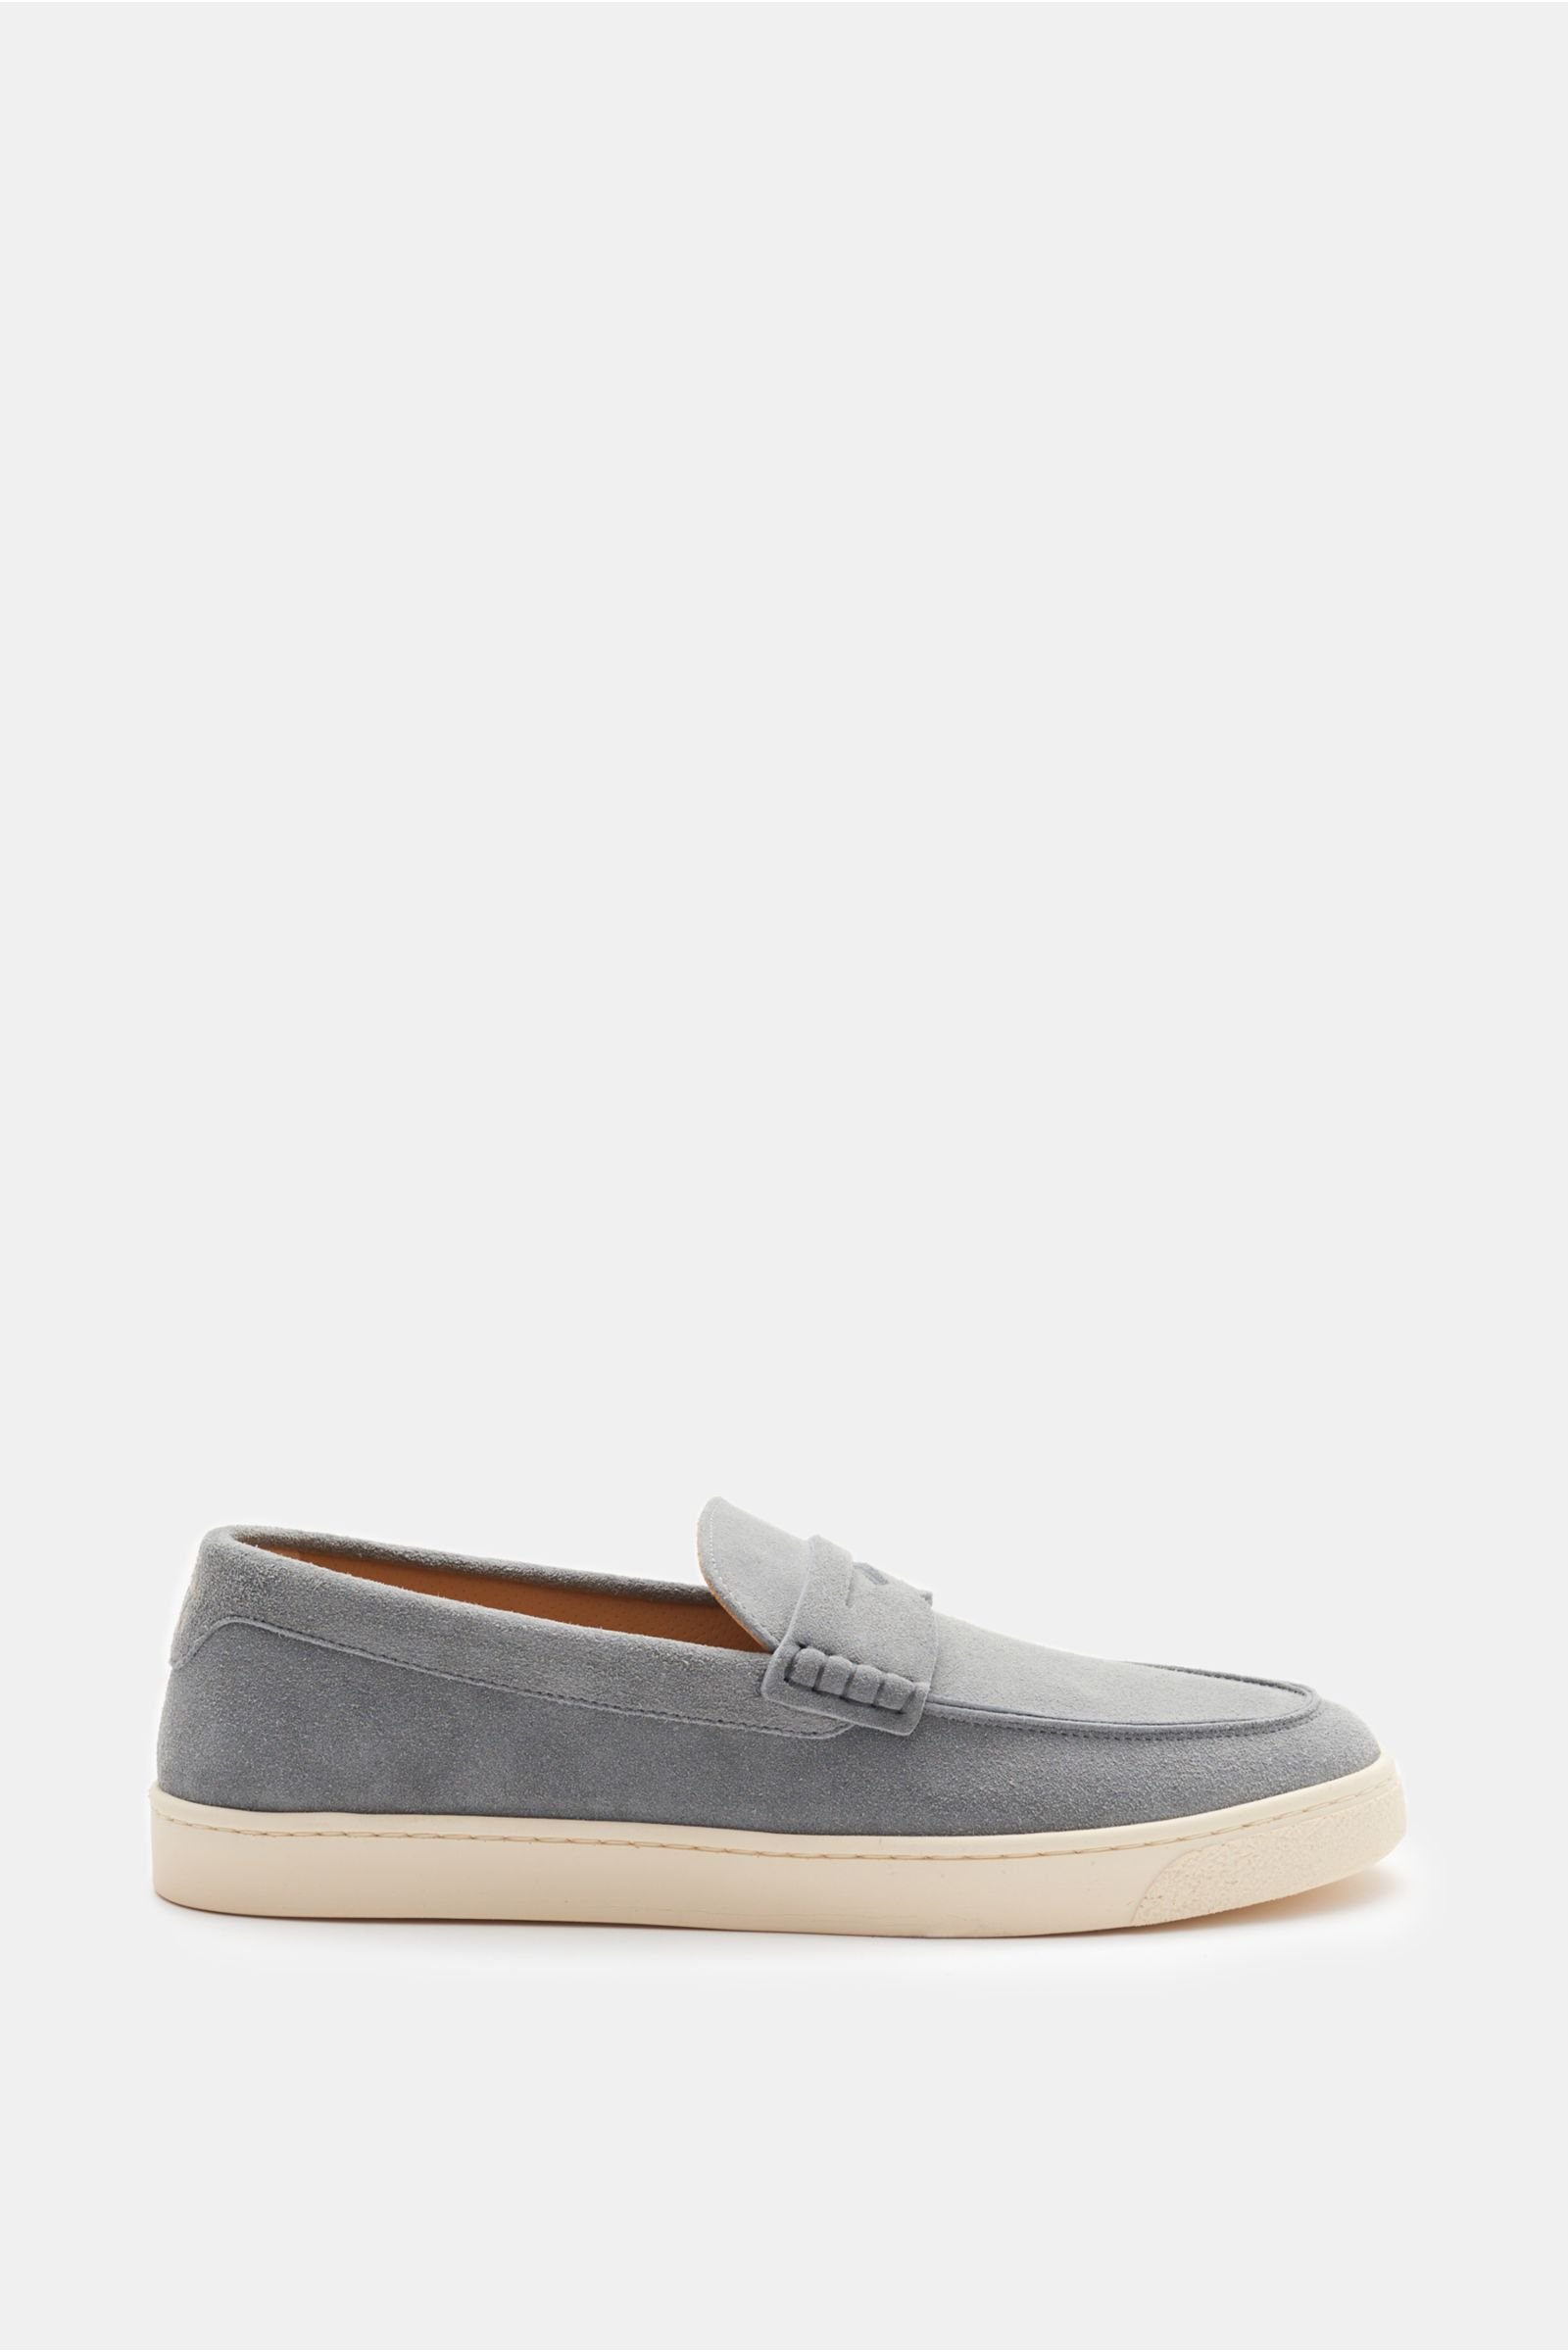 Penny loafers grey